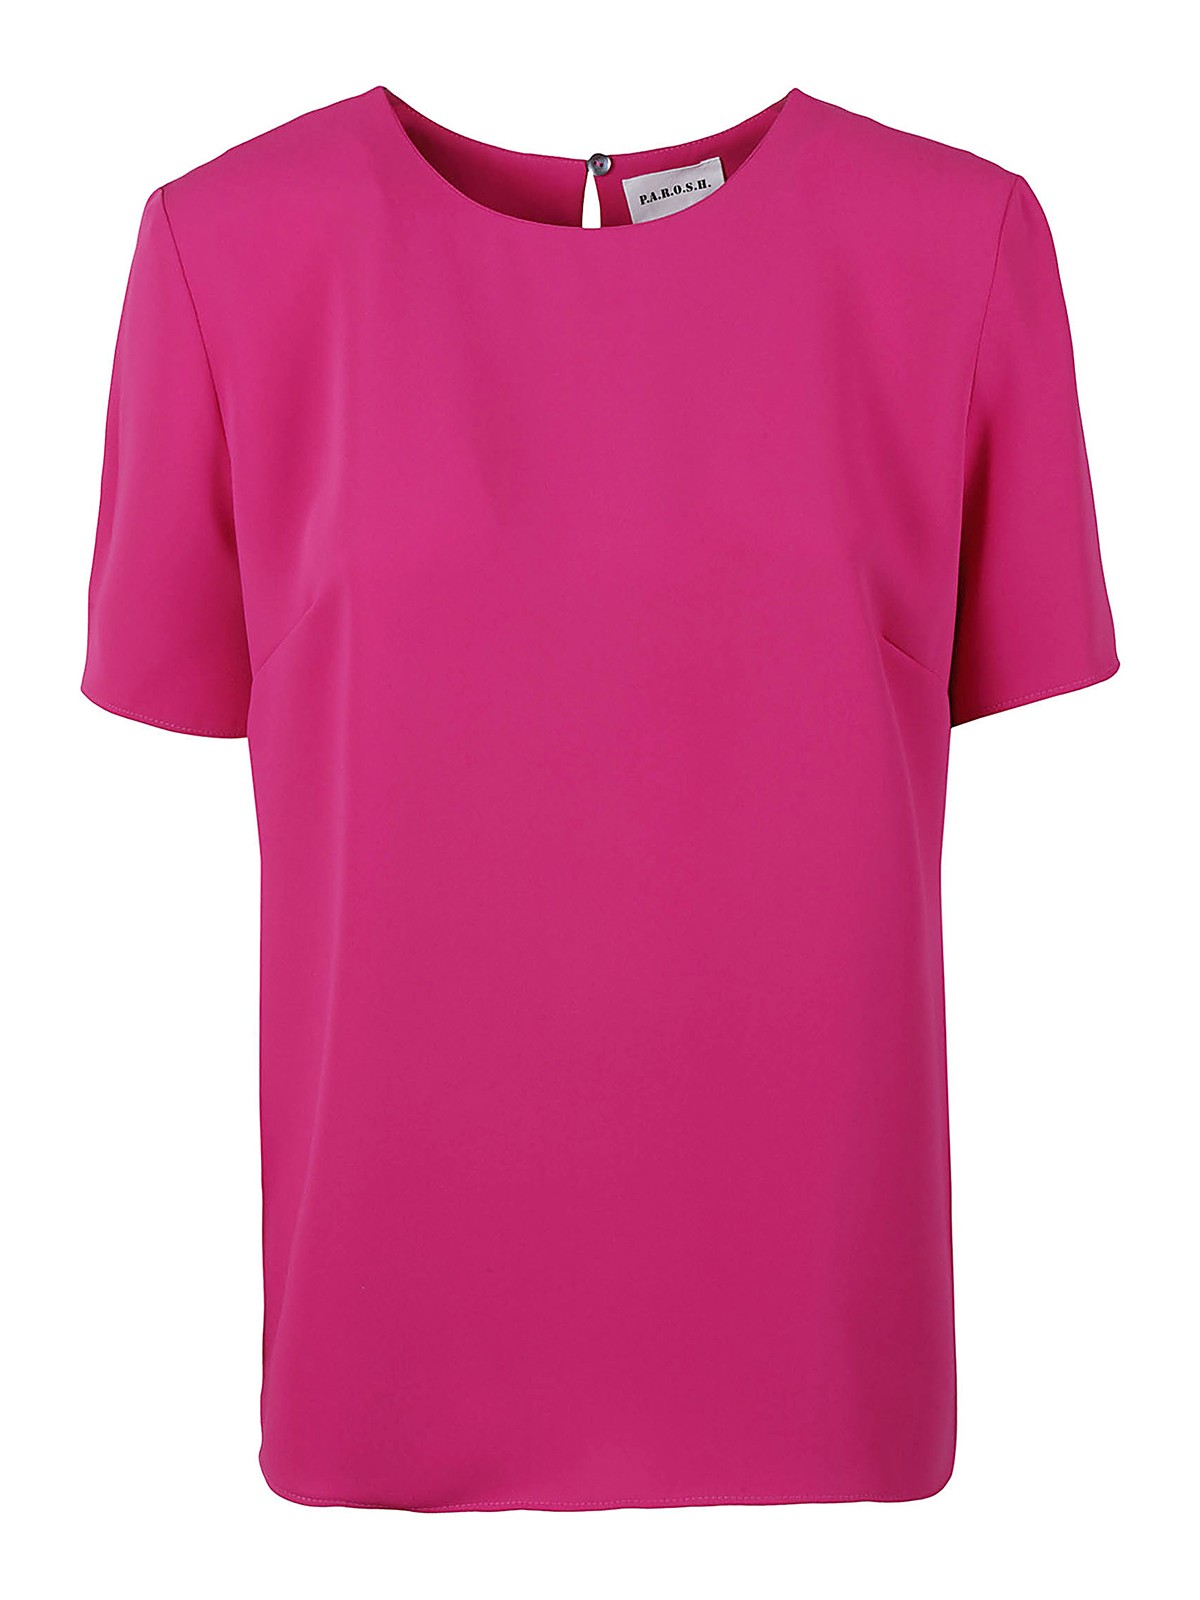 P.a.r.o.s.h Panty Blouse In Fuchsia